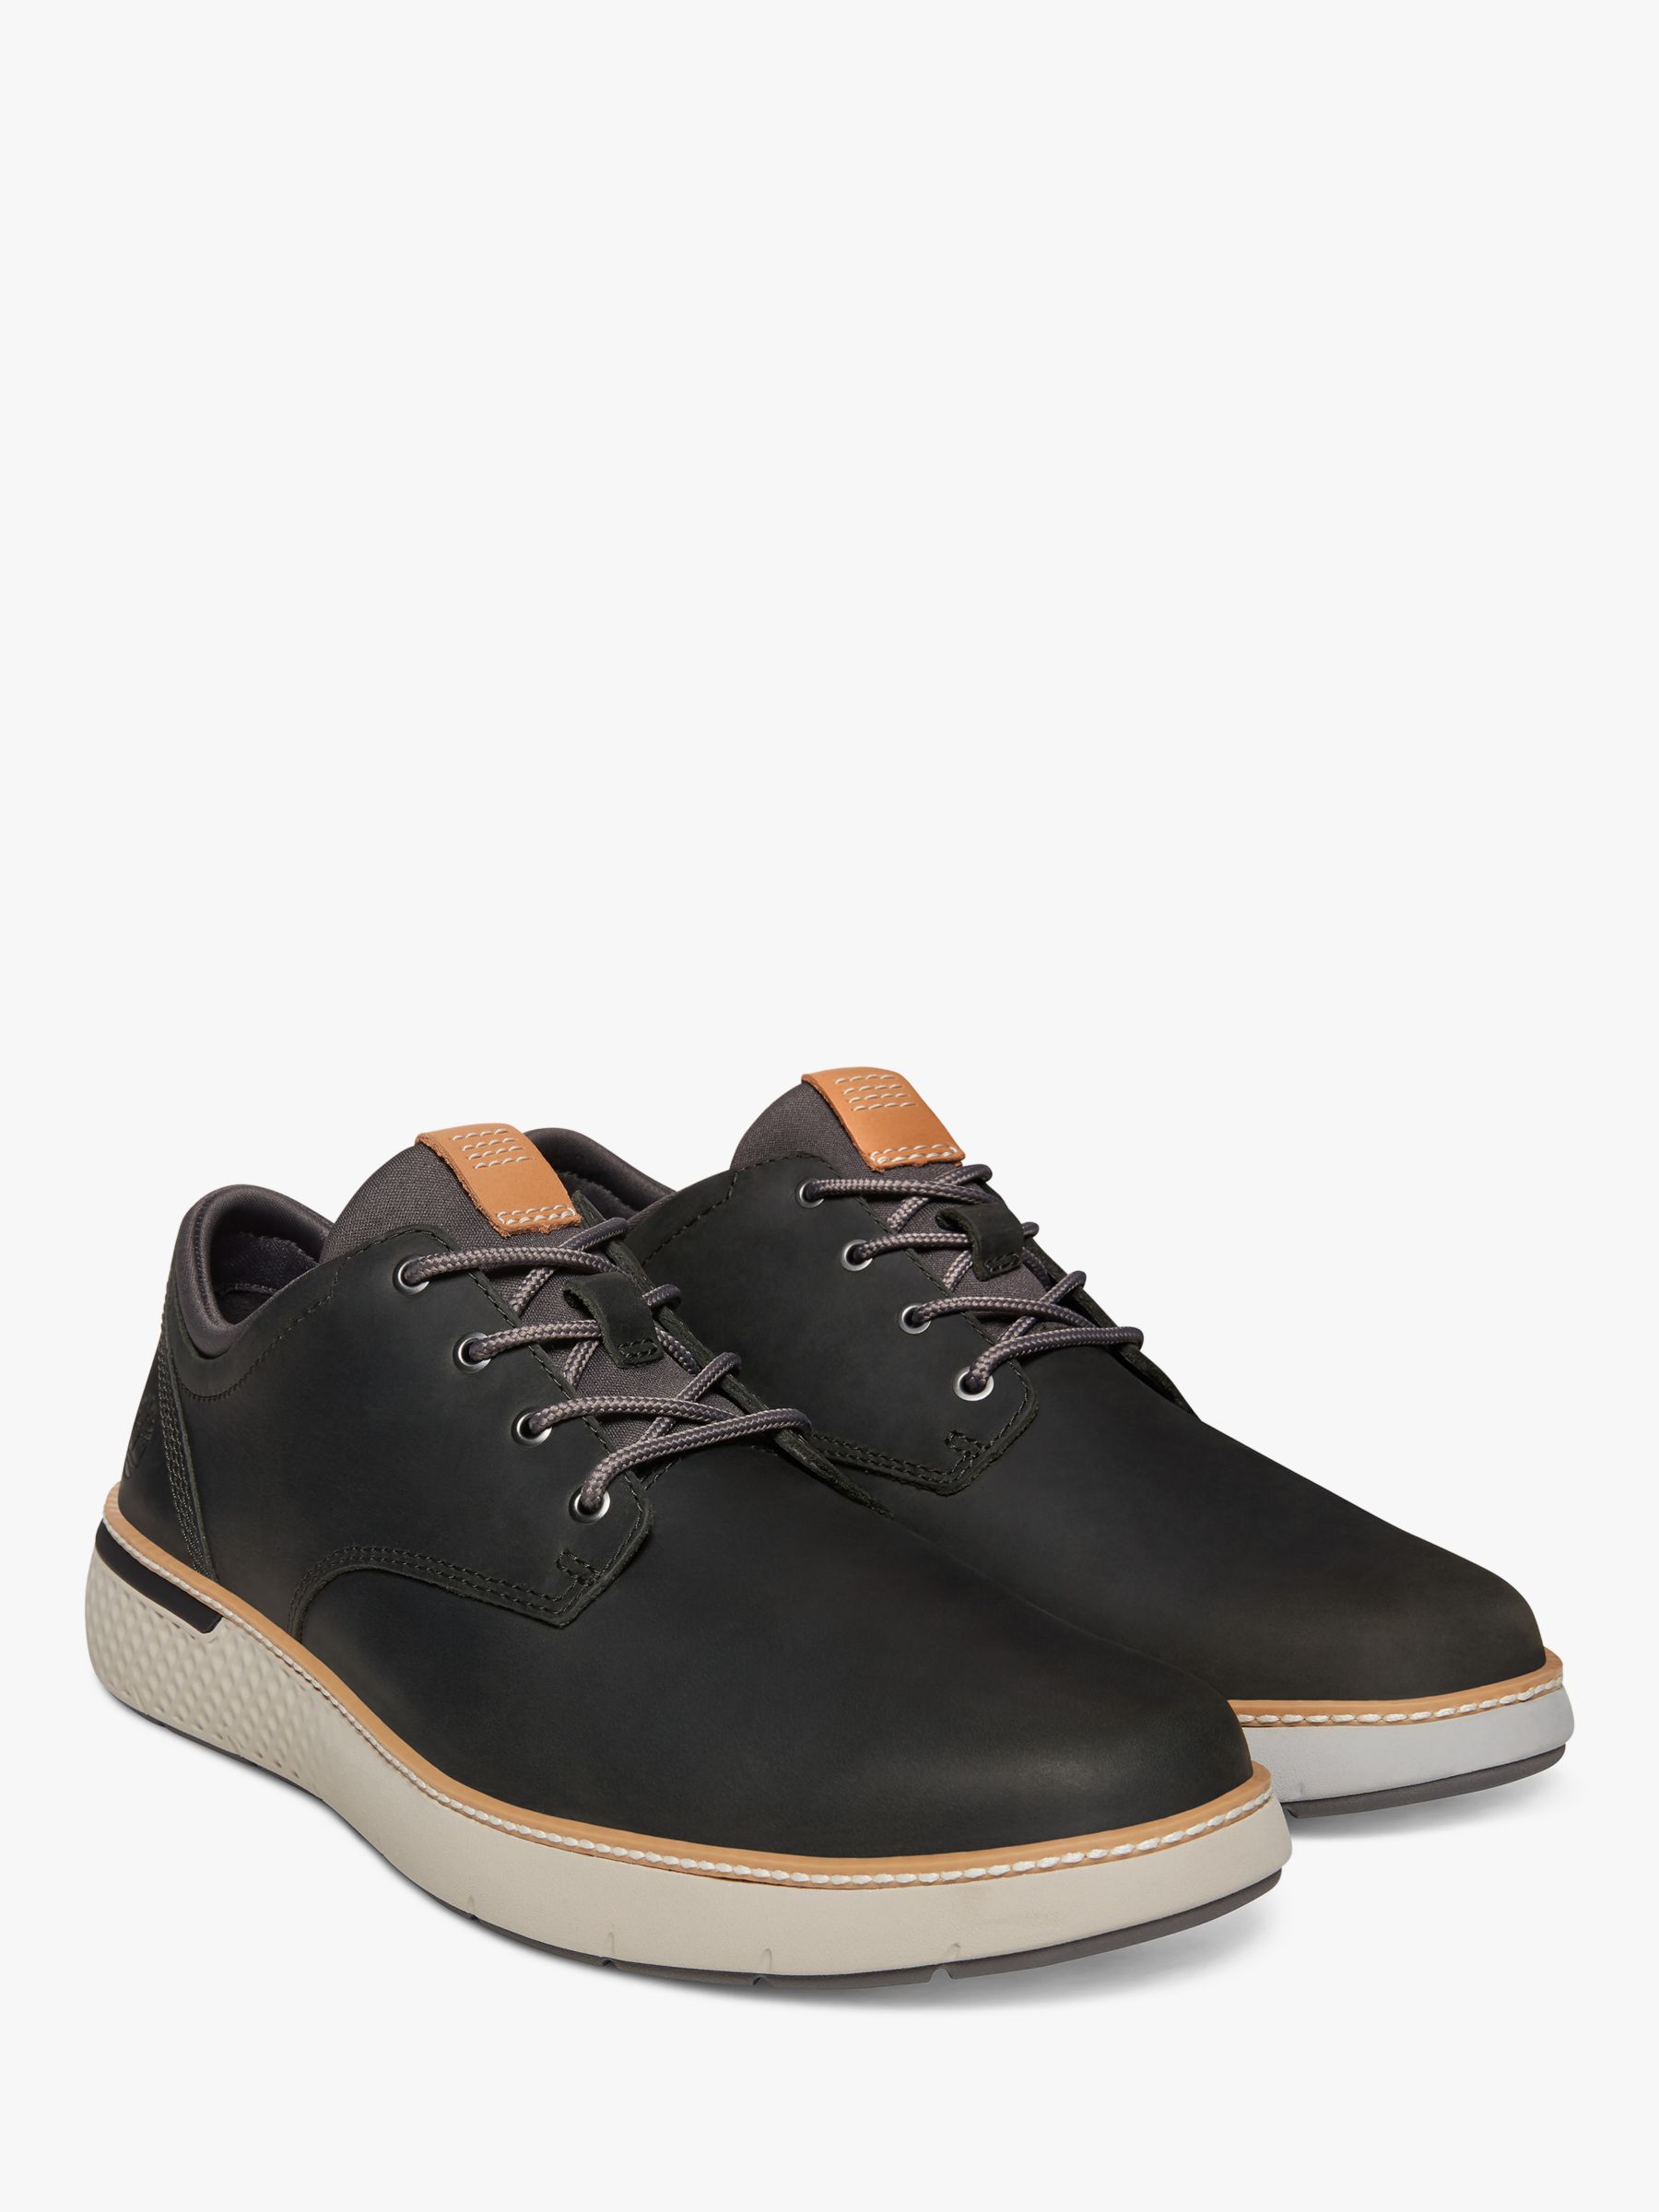 timberland men's cross mark oxford shoes